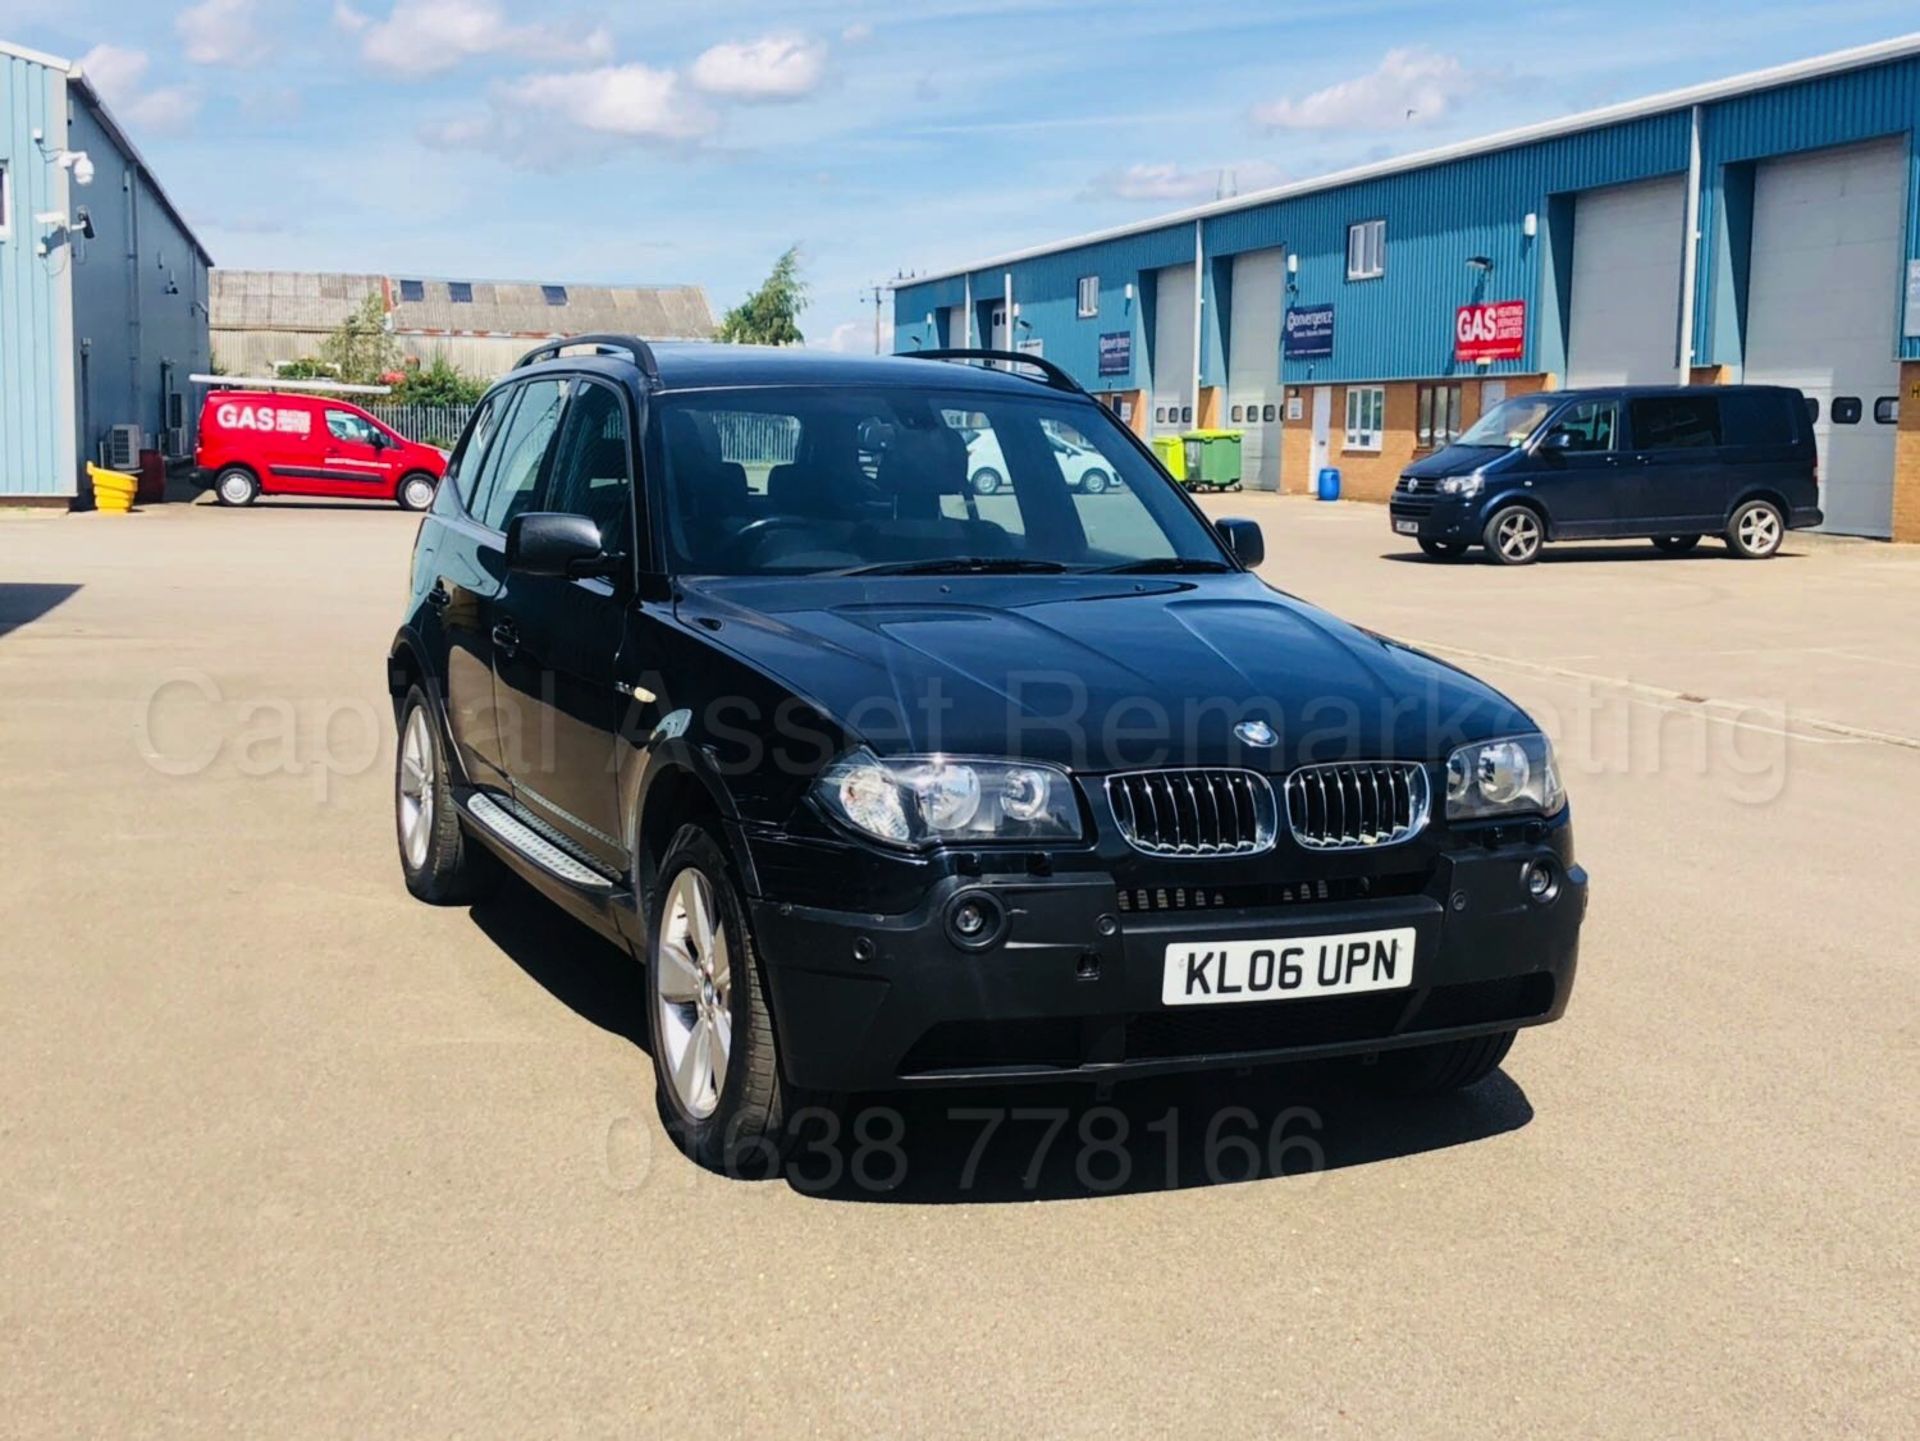 BMW X3 *SPORT EDITION* (2006) '3.0 DIESEL - 218 BHP - AUTOMATIC' *LEATHER / AIR CON* (NO VAT) - Image 26 of 29